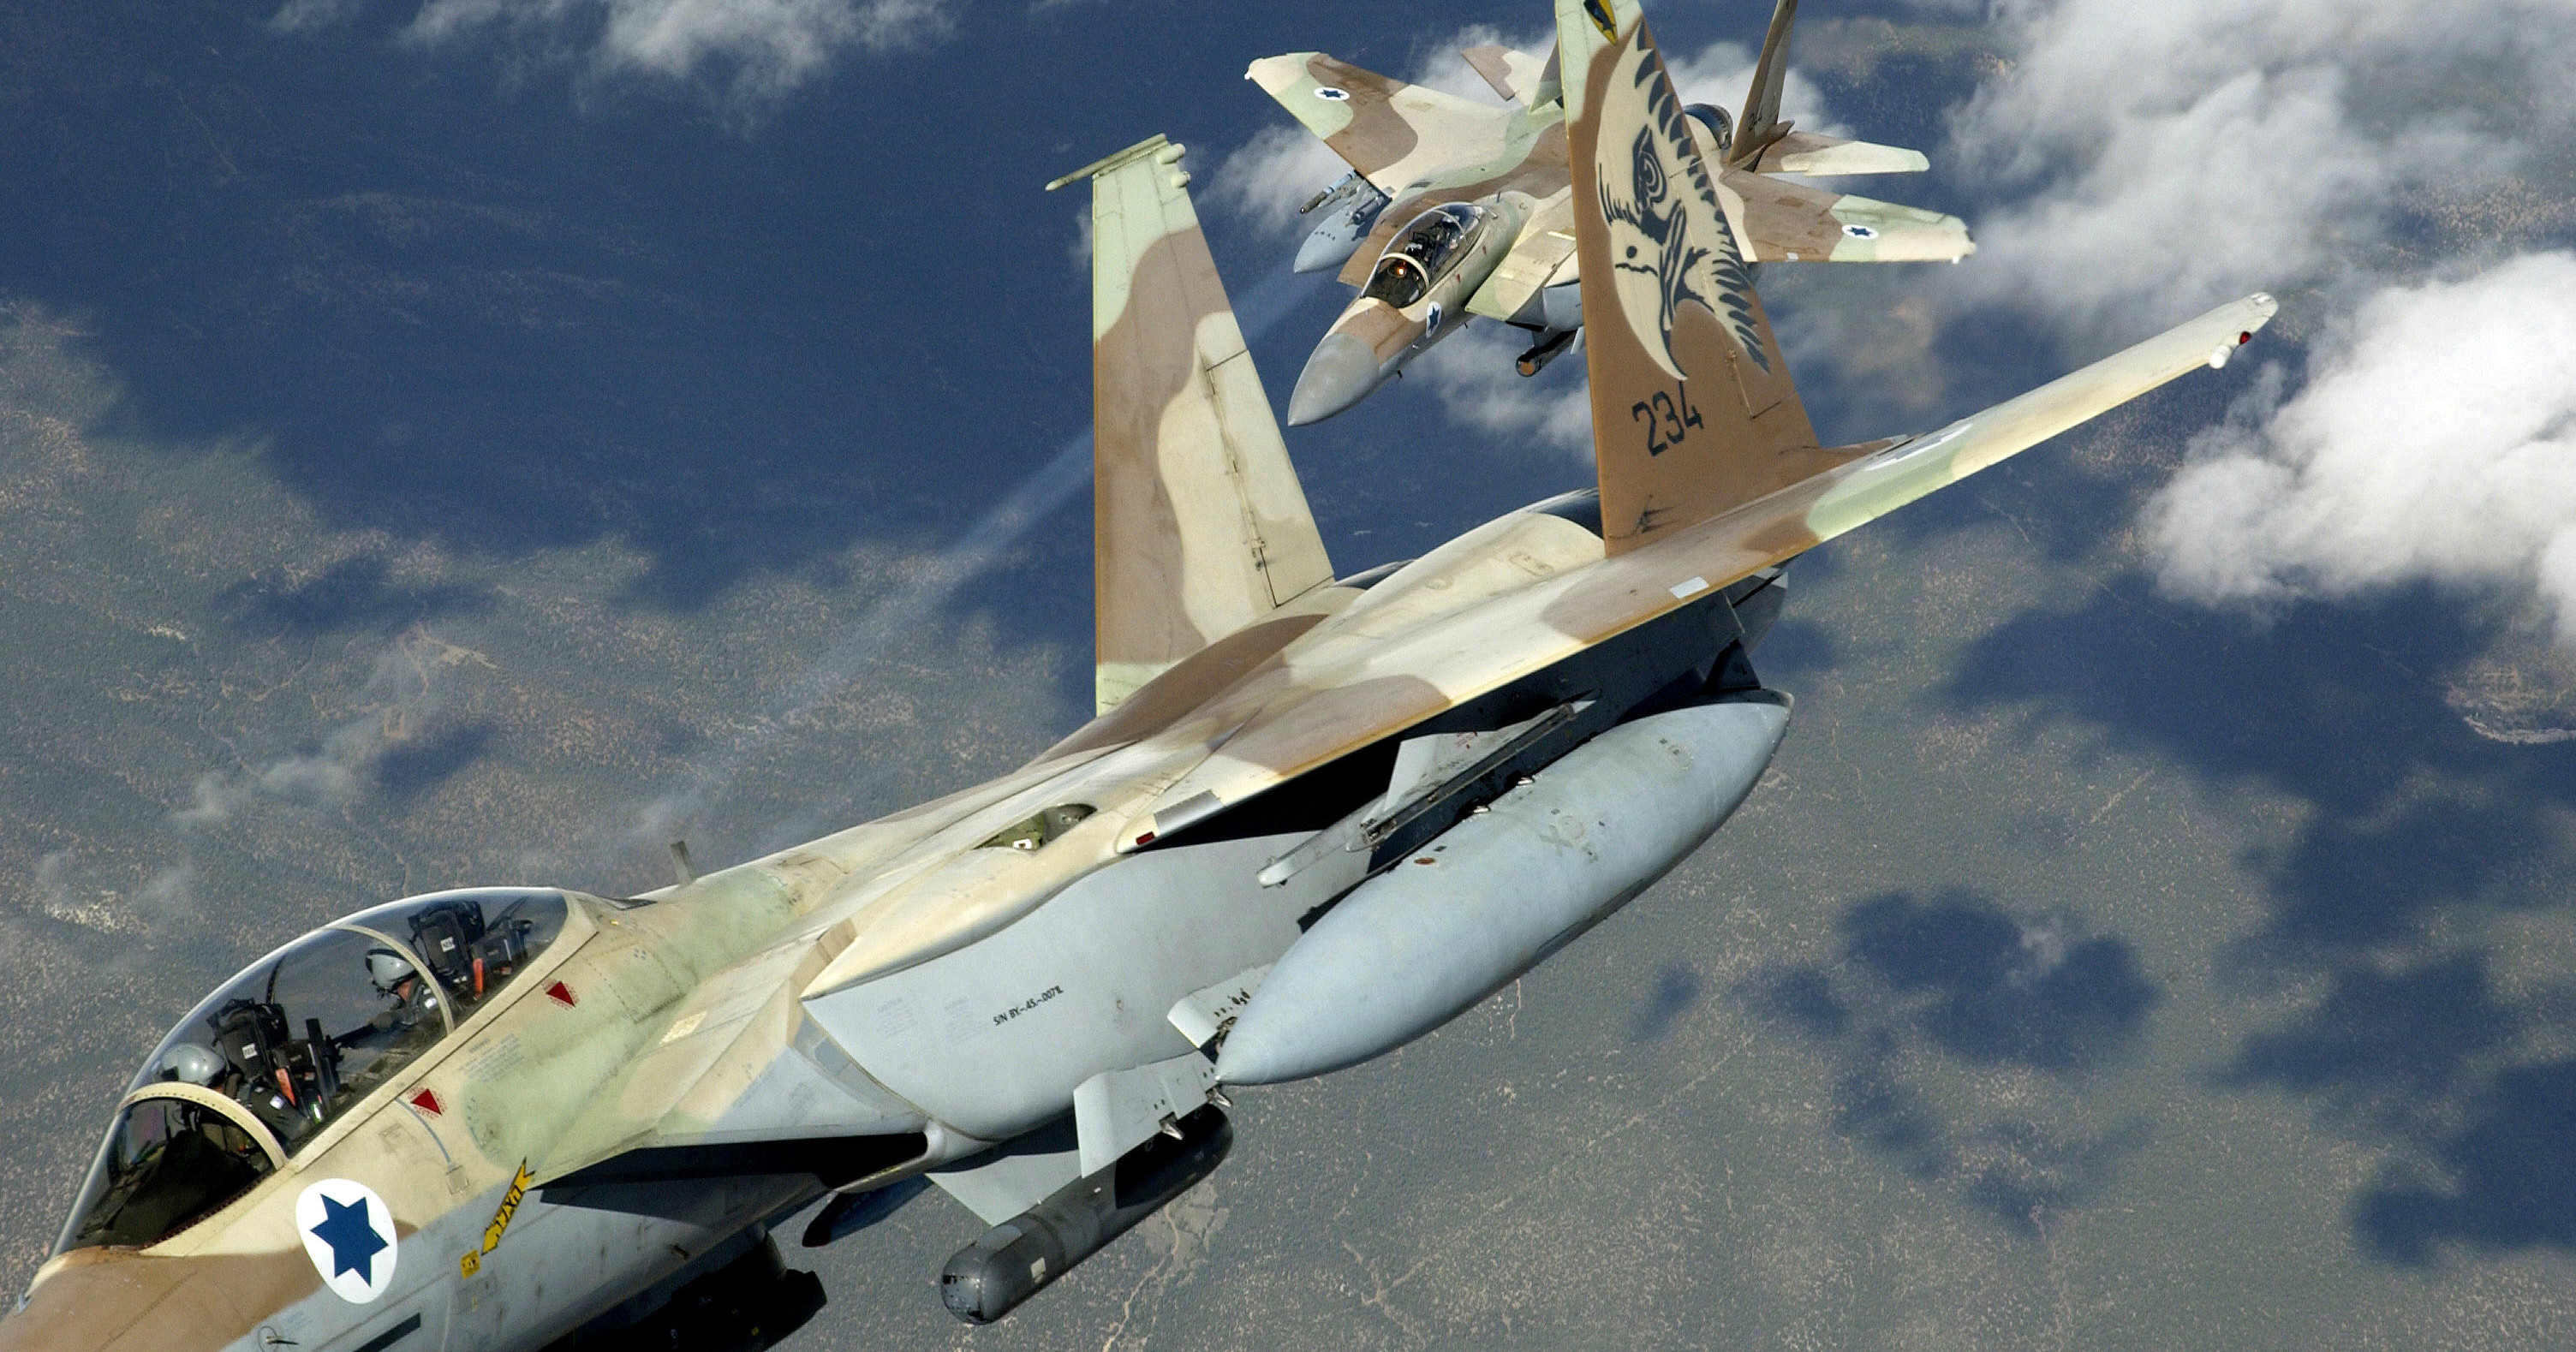 This is who would win a dogfight between Russia and Israel